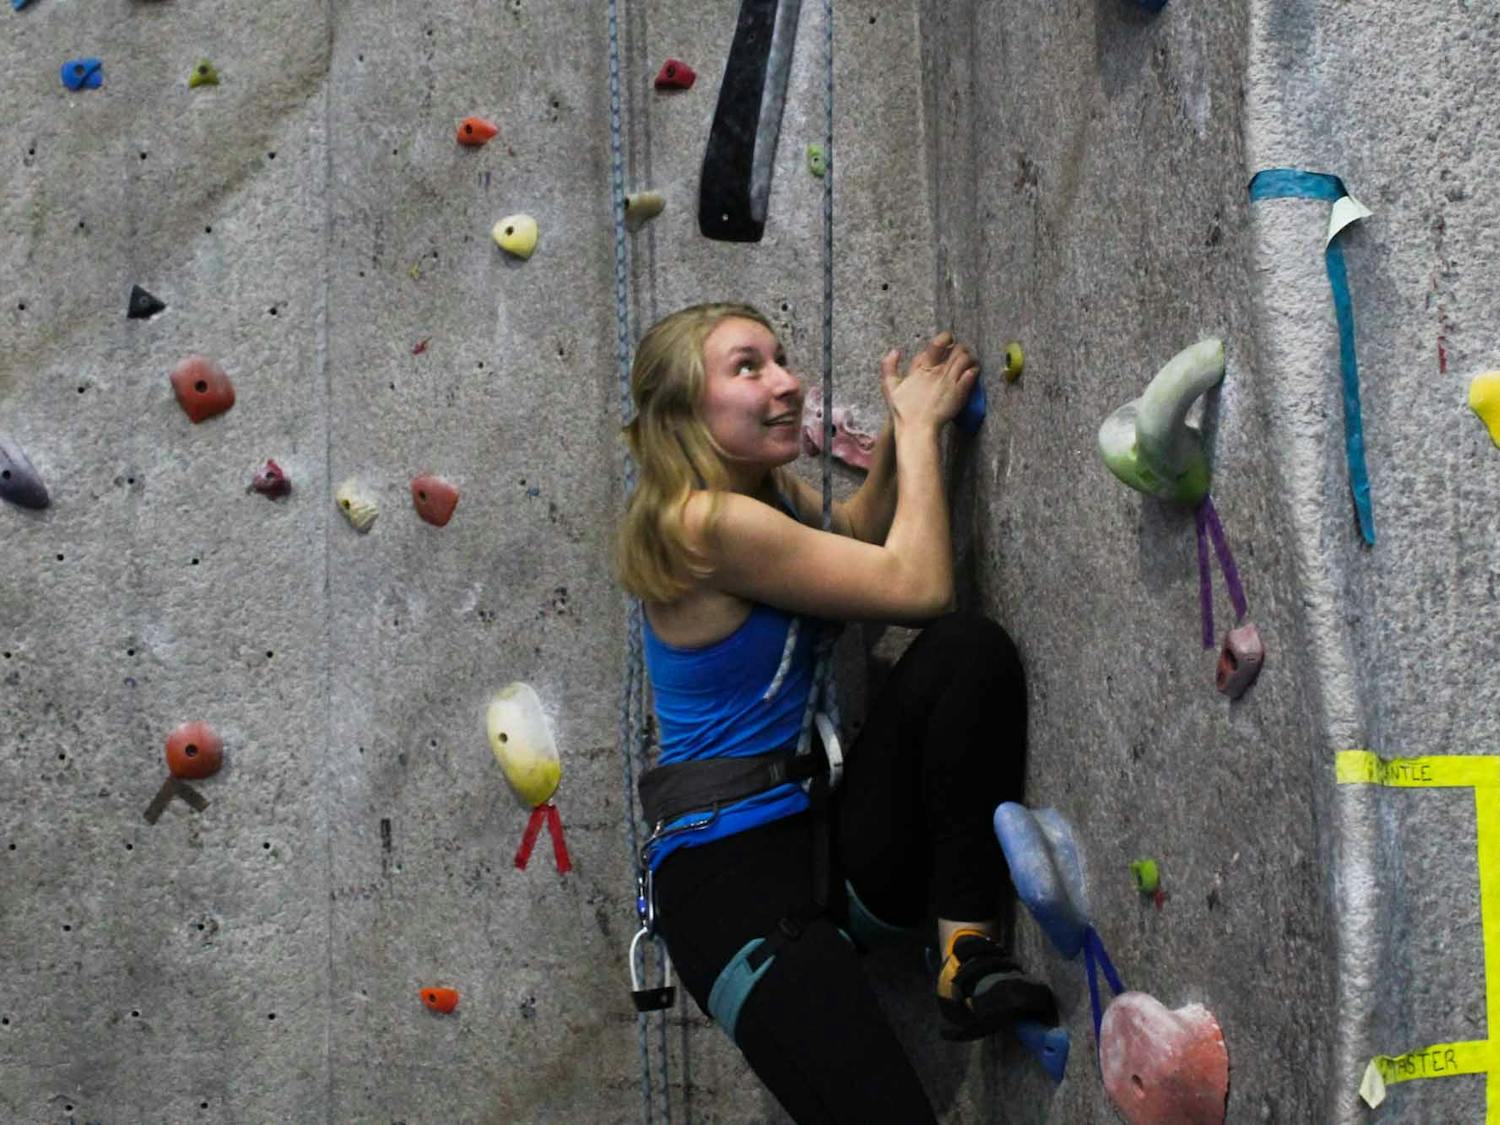 Anna Baechtold, a first-year art history major, practices rock climbing during practice on Thursday, Feb. 27, 2020 at Fetzer Gym C. "It's so literal and so easy to see your progress where in other sports, it's a bit more arbitrary," she said.